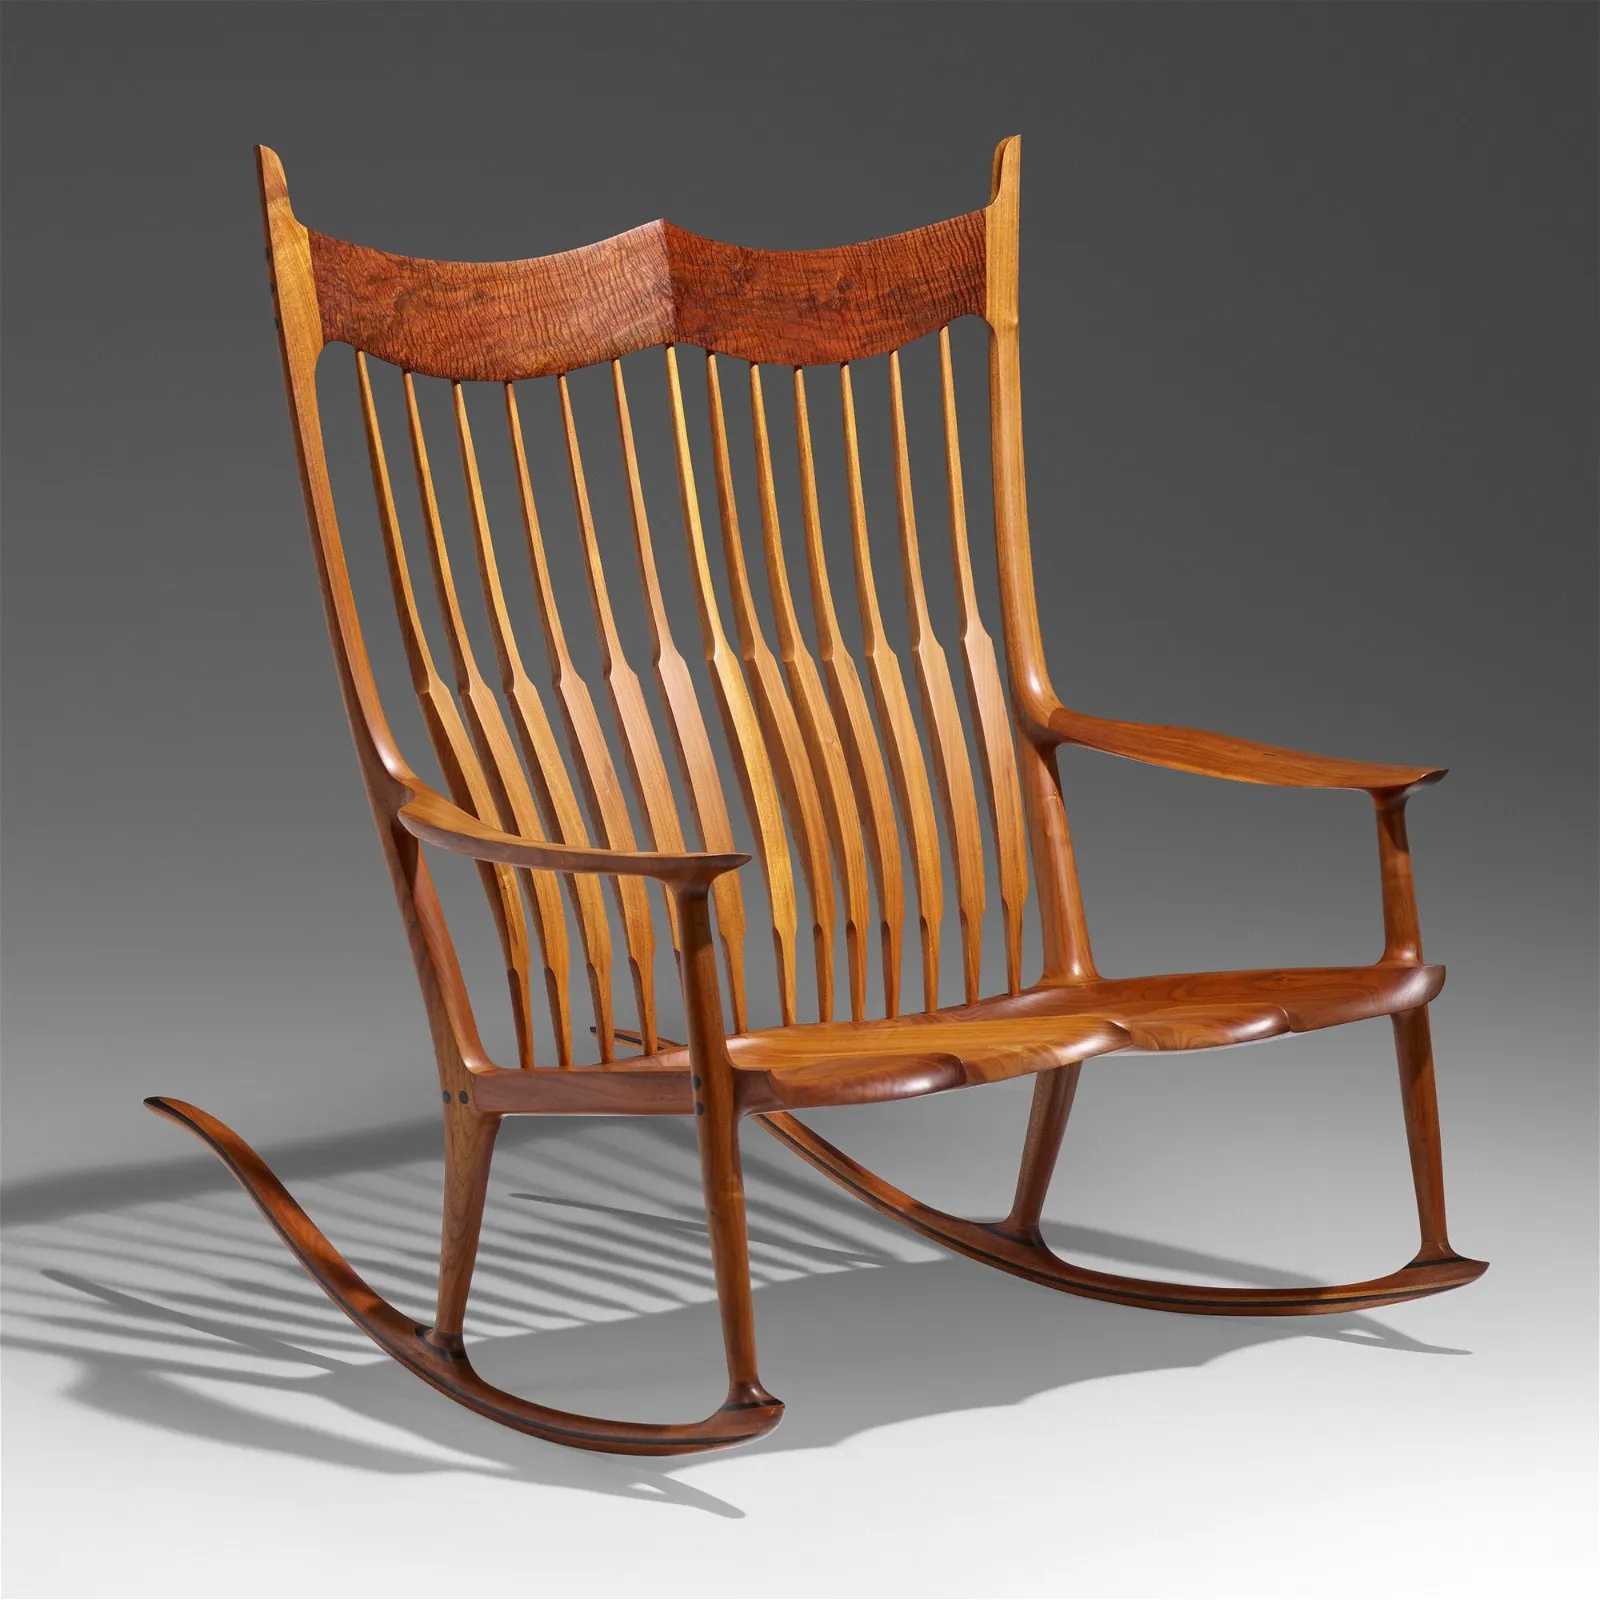 Sam Maloof Double Rocking Chair leads our five lots to watch